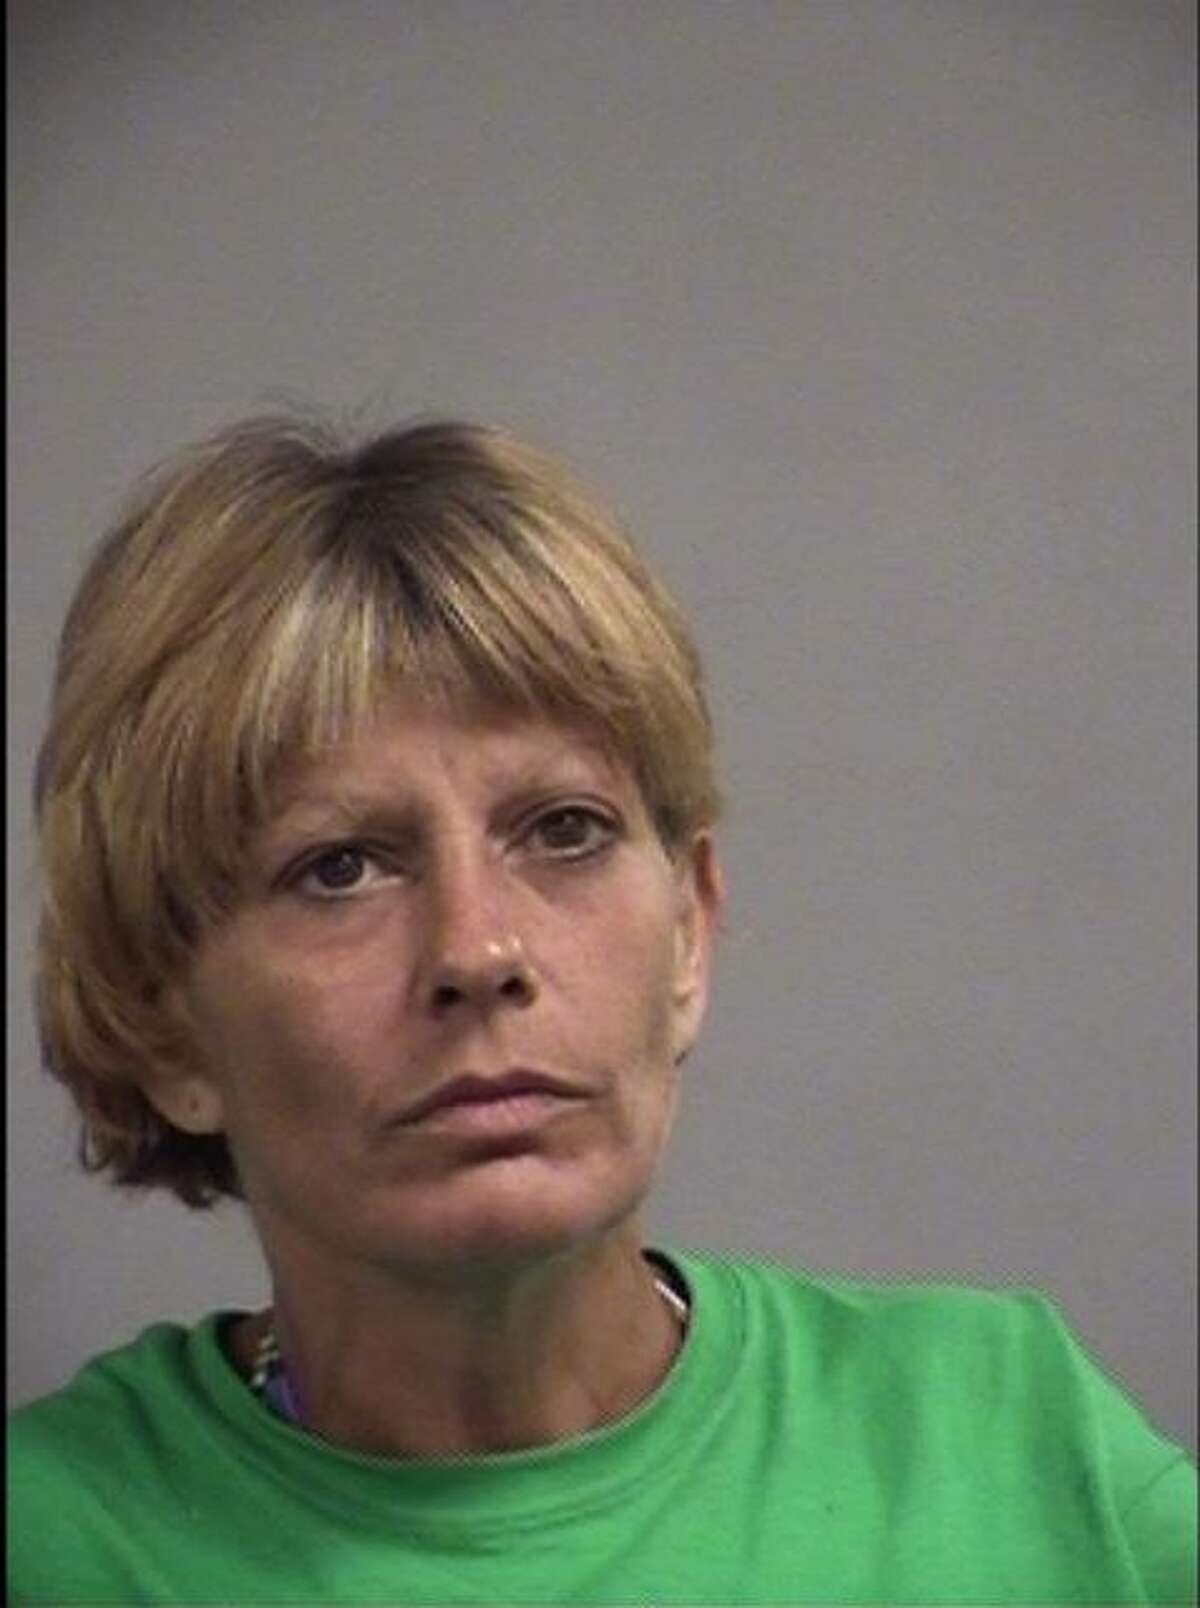 Christina Blevins, 48, is accused of stabbing man during an incident which began after she hit him with a burrito. She was arrested by Louisville Metro Police in Kentucky July 5. The 48-year-old is currently being held at Jefferson County Jail on a $5,000 bond, according to jail records. She was charged with assault, a second degree felony.